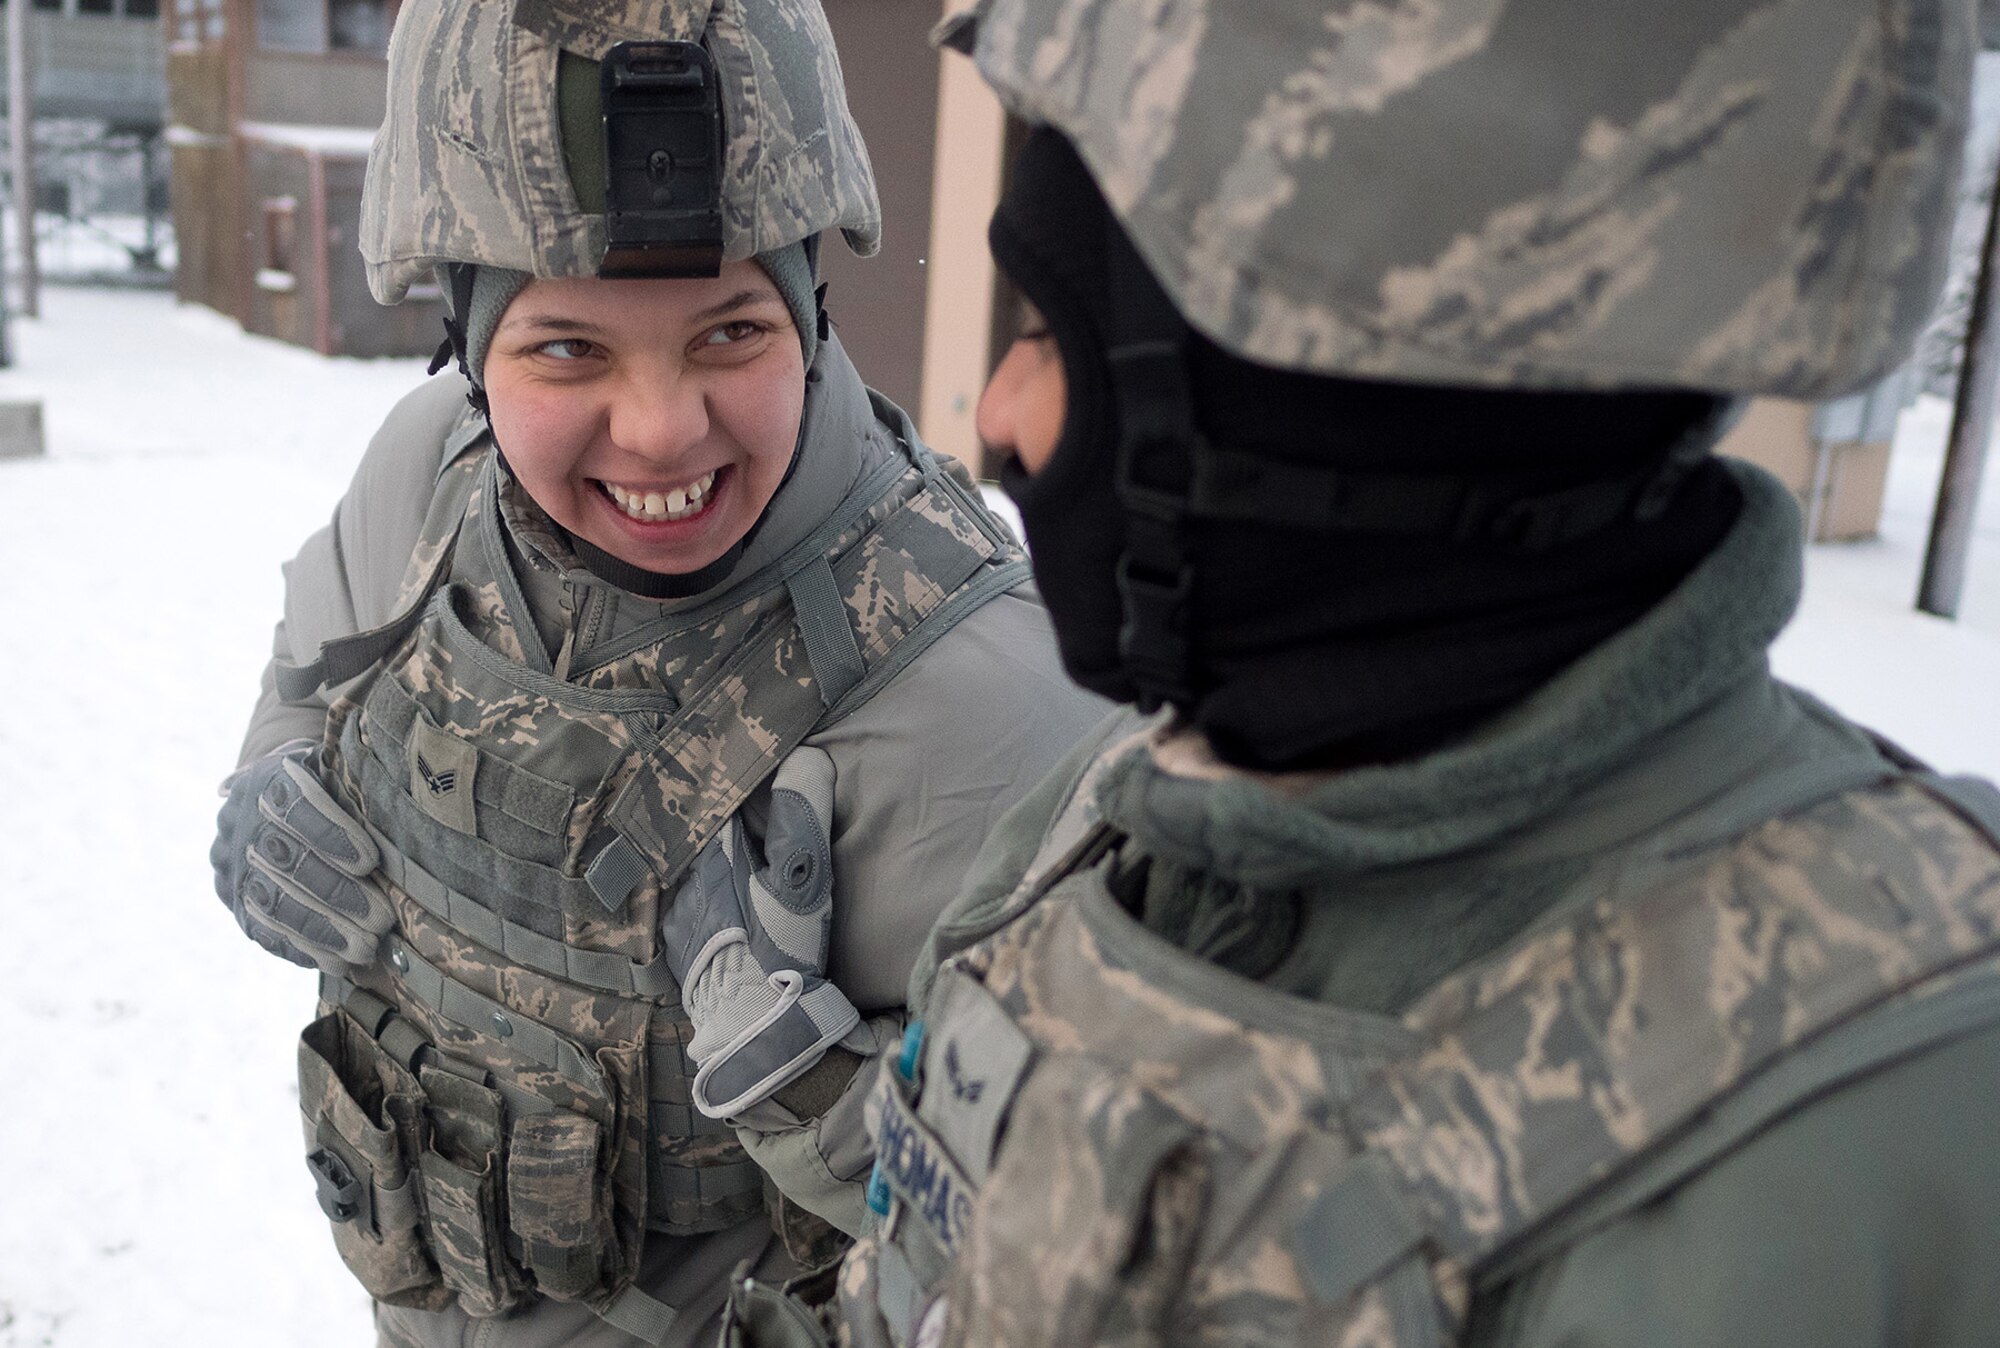 Senior Airman Tina-Louise Dunbar, a native of Anchorage, Alaska, left, and Airman 1st Class Kaylon Thomas, a native of Conway, Ark., both assigned to the 673d Security Forces Squadron, share a laugh on the gun line during a machine gun qualification range on Joint Base Elmendorf-Richardson, Alaska, Jan. 10, 2018. Security Forces Airmen perform extensive training in law enforcement as well as combat tactics to protect U.S. Military bases and assets both stateside and overseas.